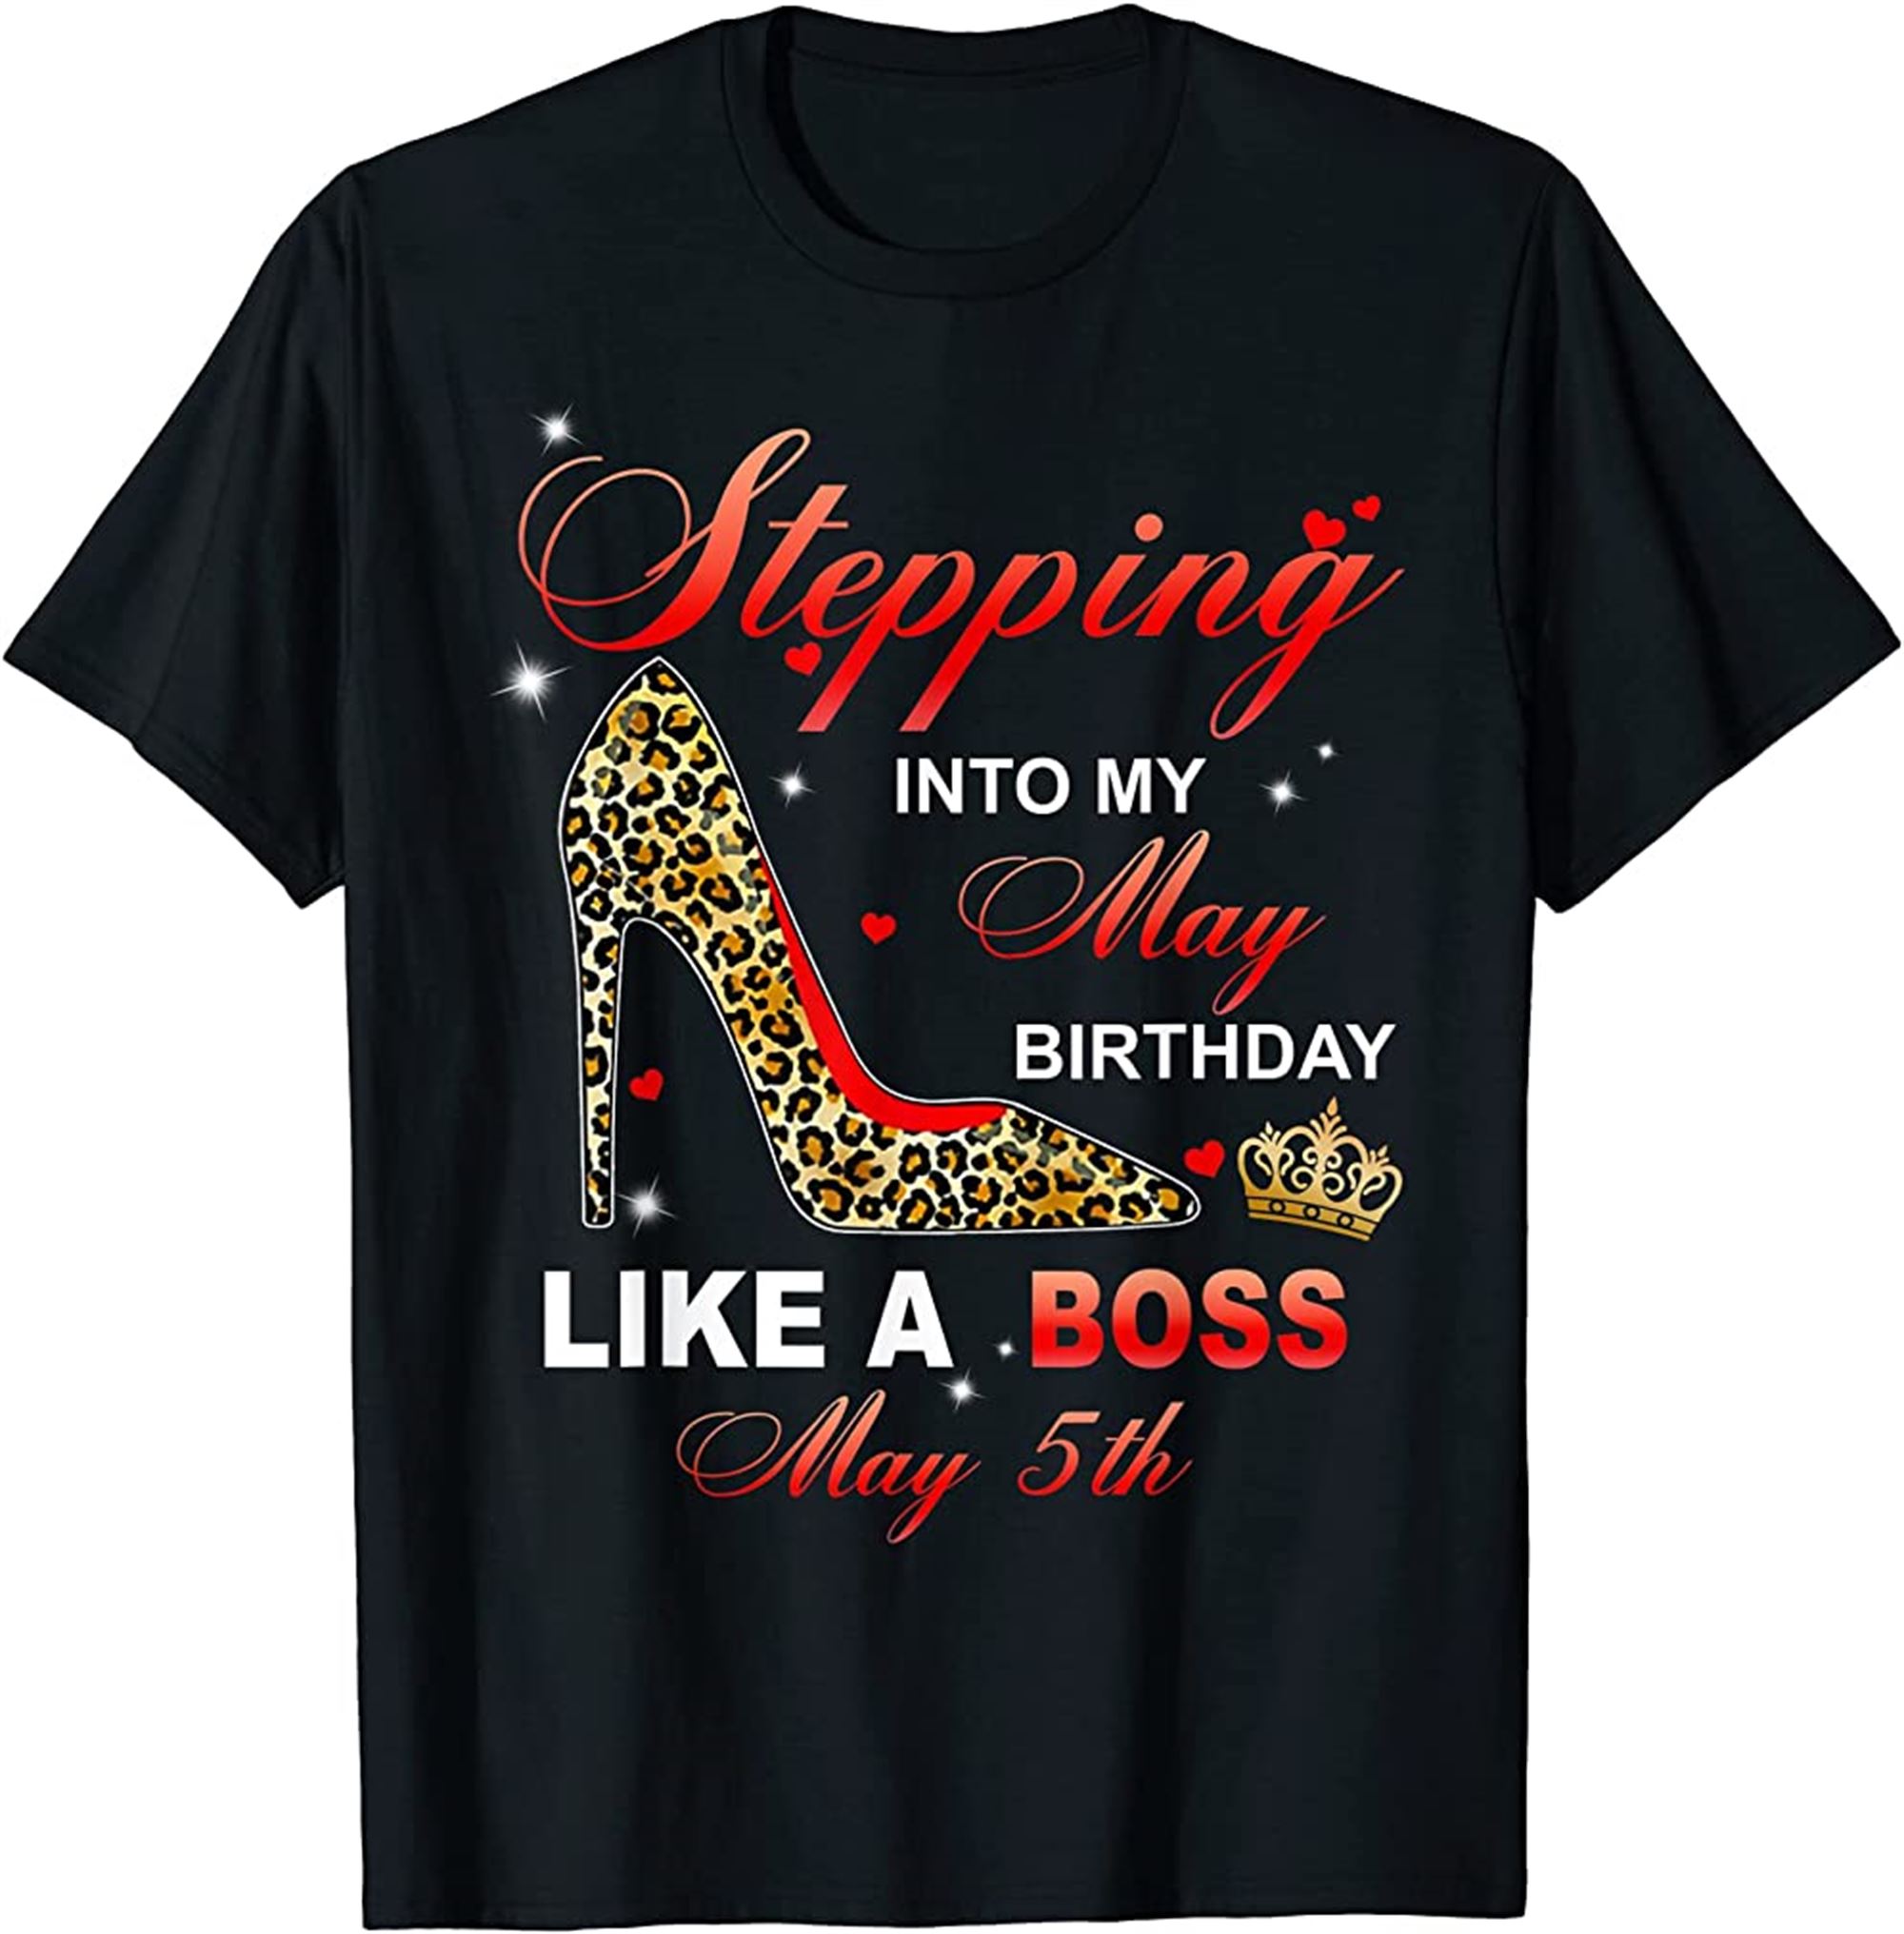 Stepping Into My May 5th Birthday Like A Boss T-shirt Size Up To 5xl